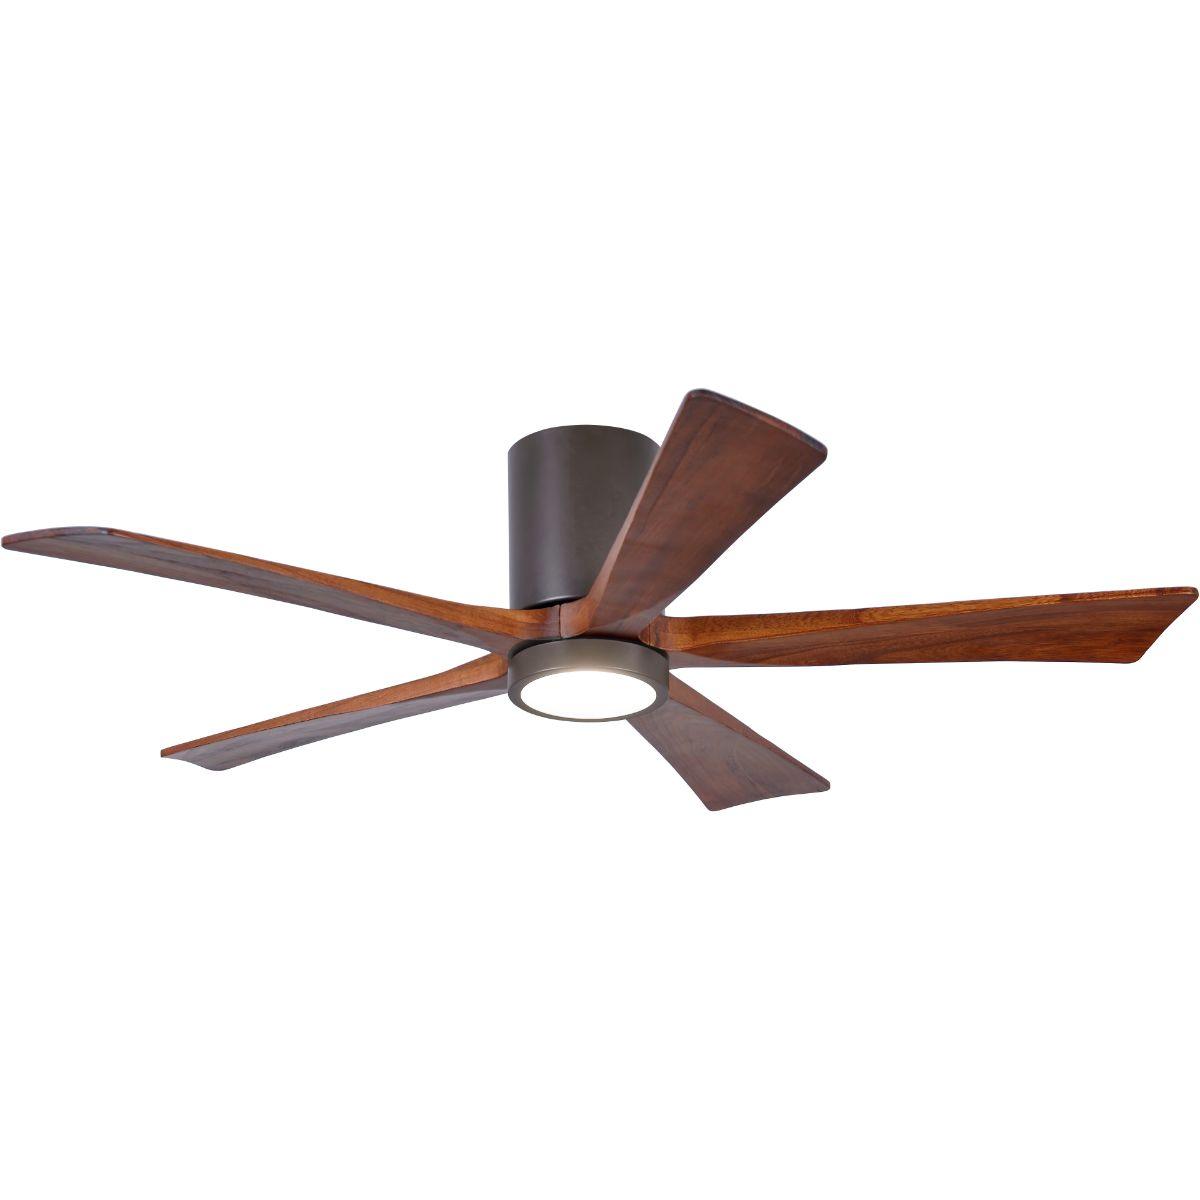 Irene 52 Inch Modern Outdoor Ceiling Fan With Light, Wall And Remote Control Included - Bees Lighting